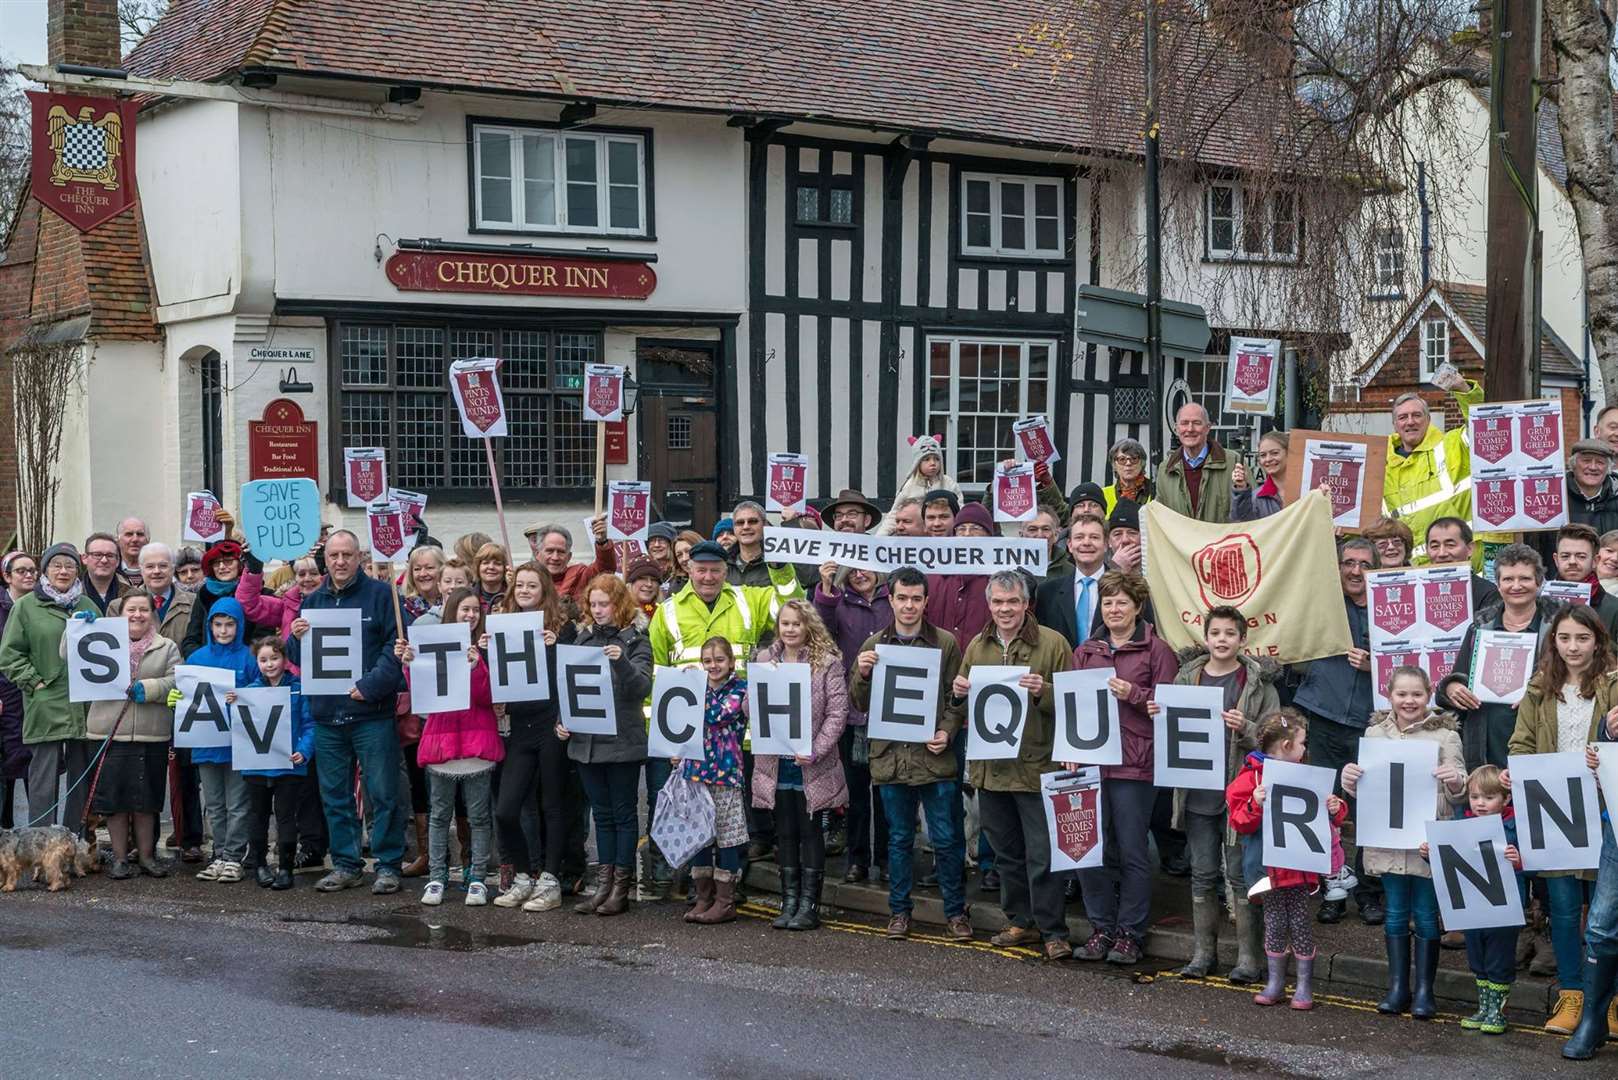 The continuing campaign to save the Chequer Inn. Demonstrators in 2016 when it was saved from housing. Picture courtesy of Matthew Titterton.